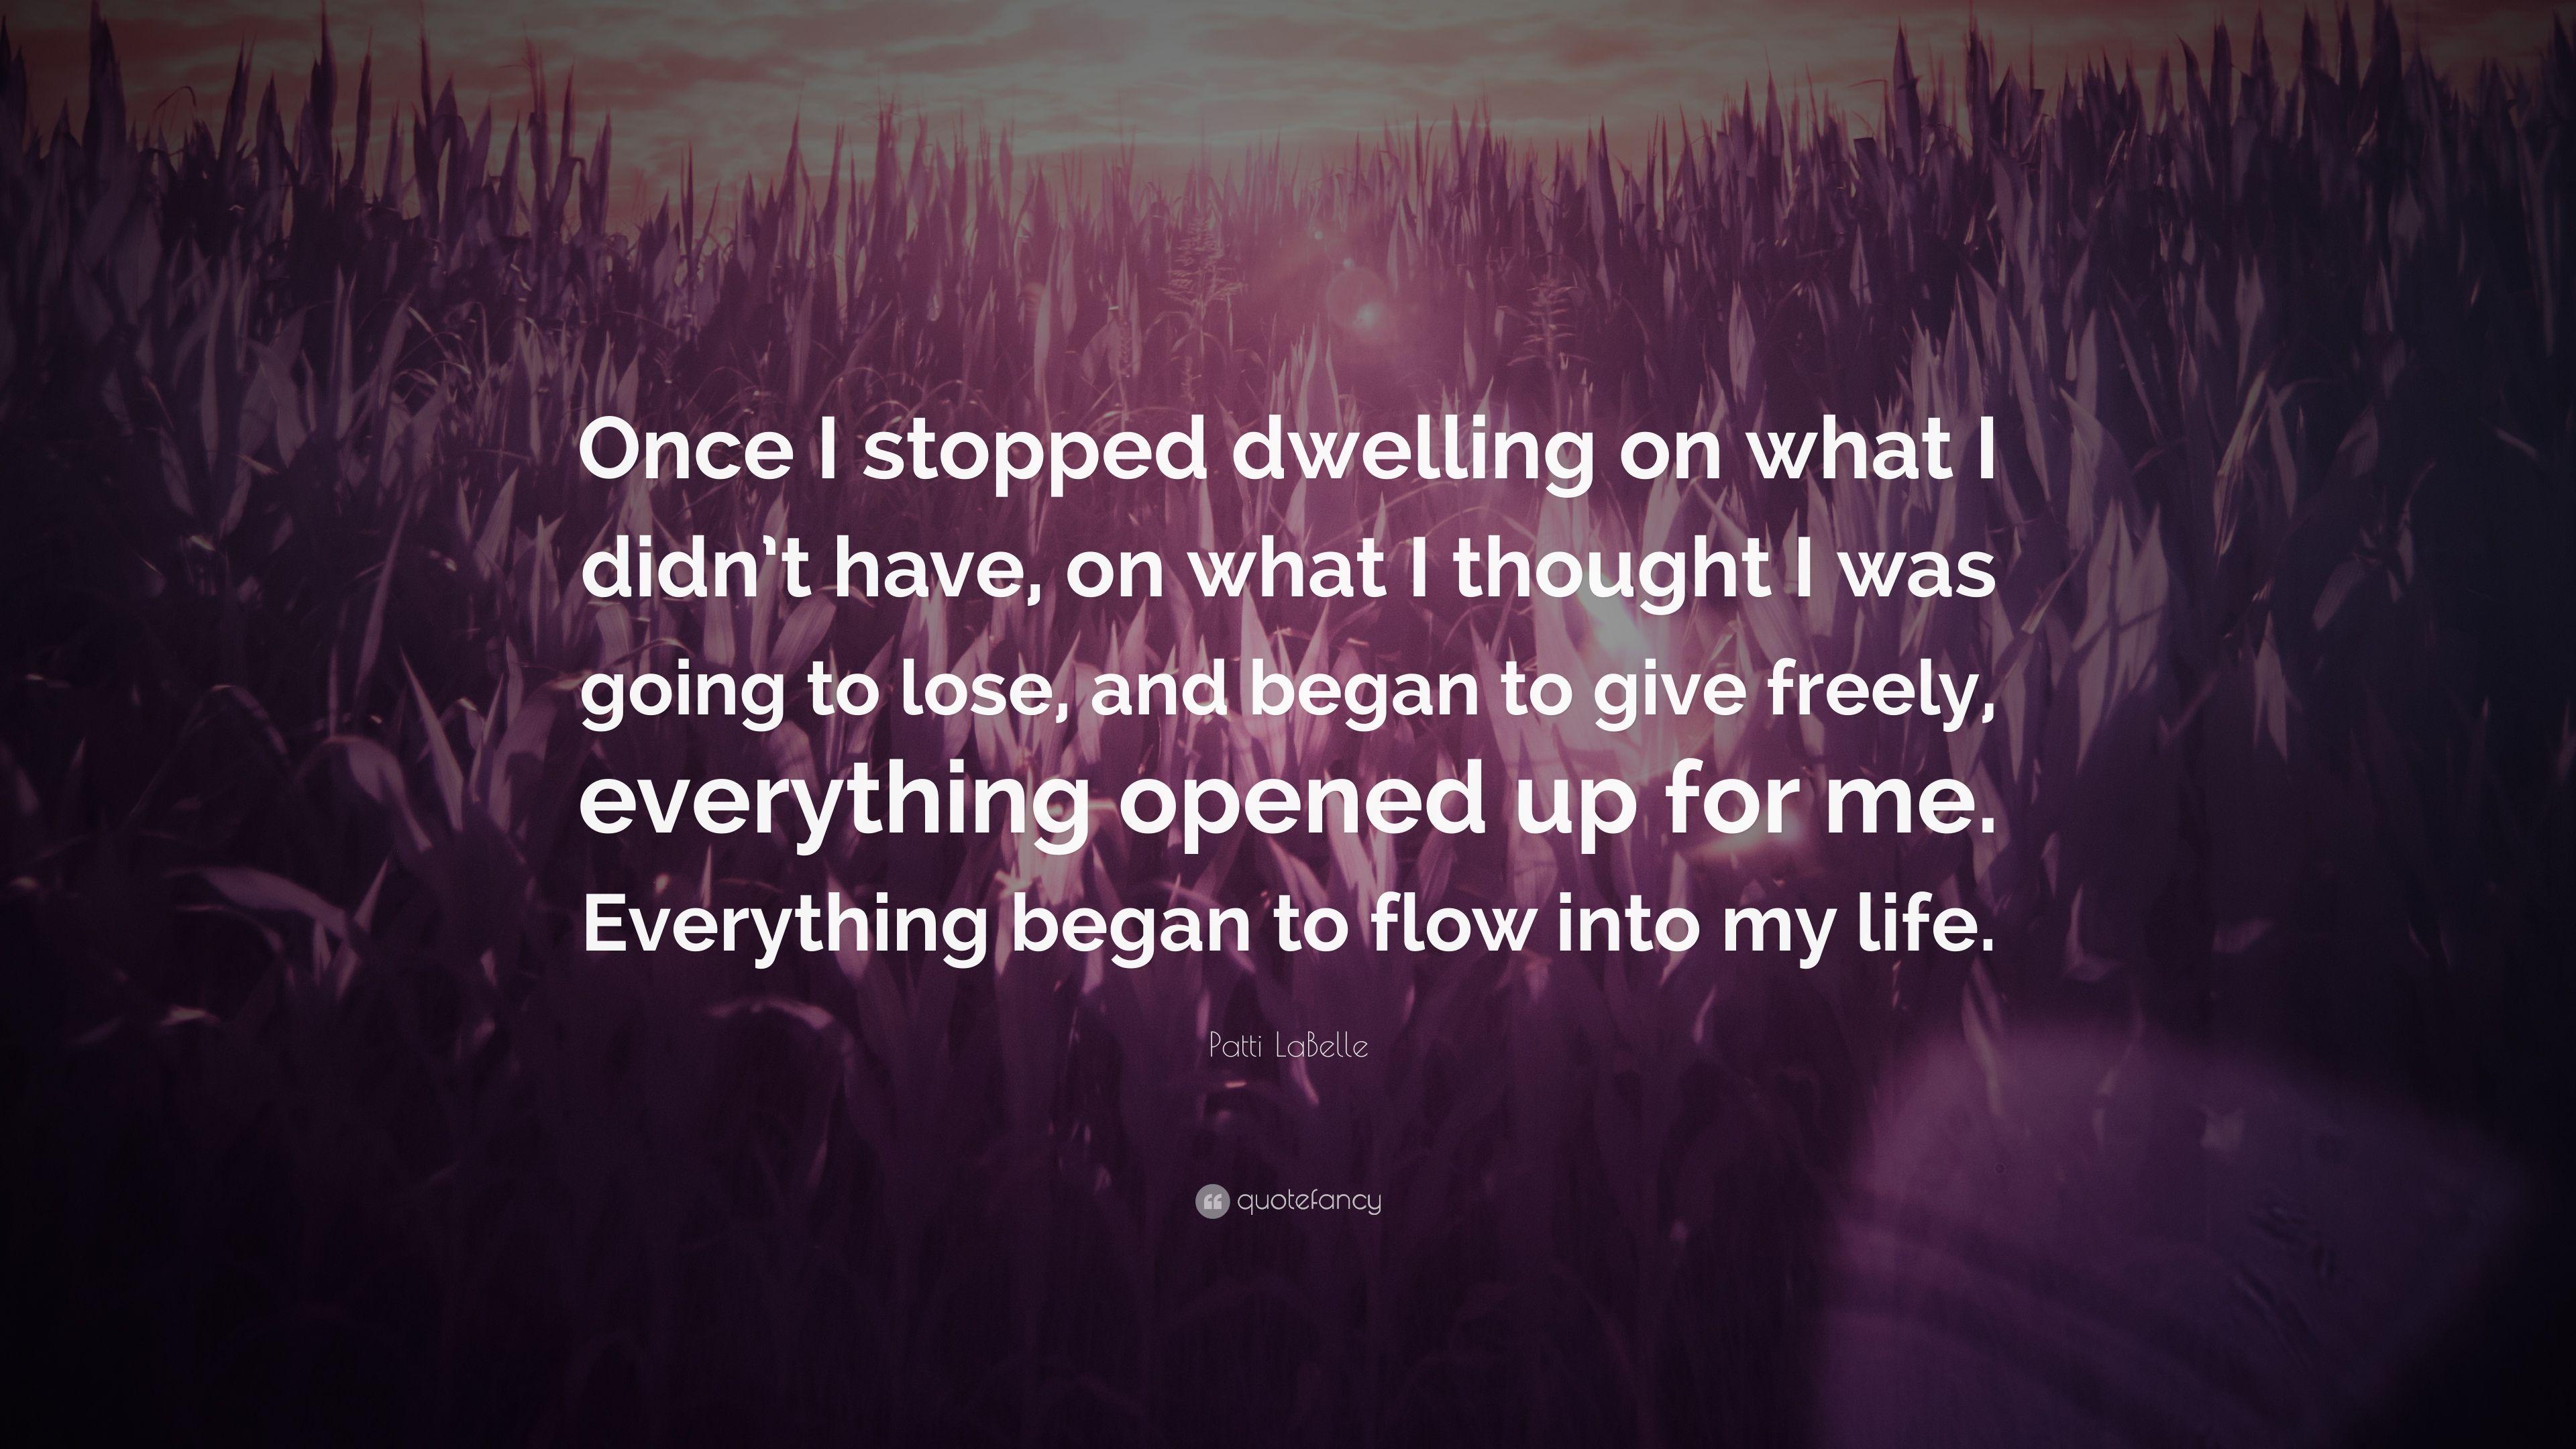 Patti LaBelle Quote: “Once I stopped dwelling on what I didn't have